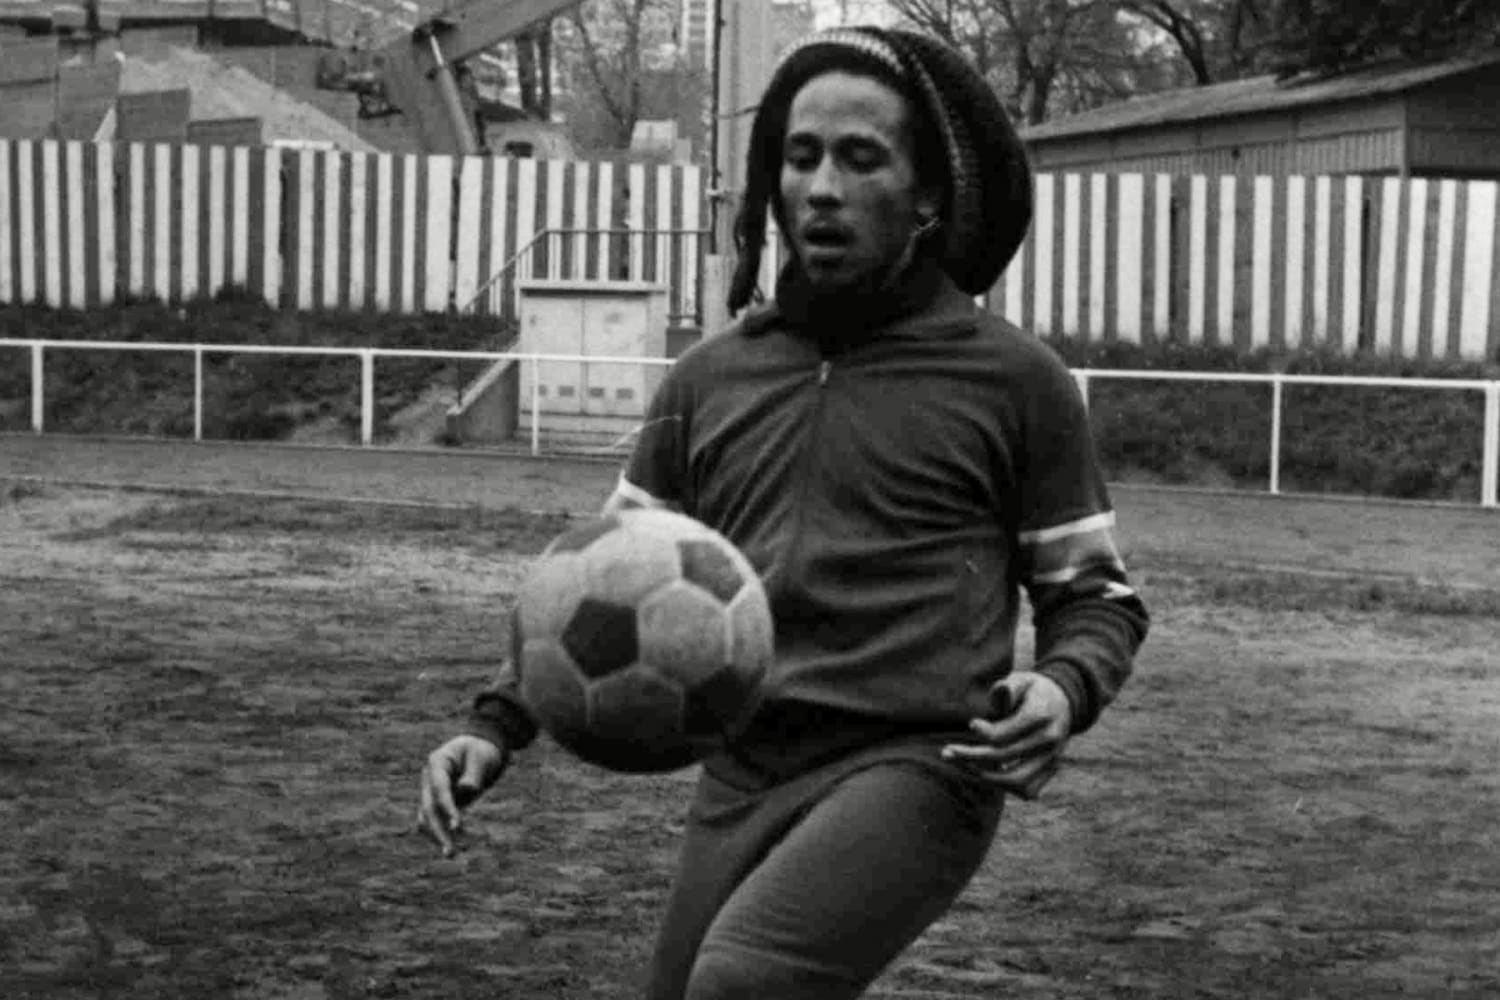 'Rhythm of the Game' Documents Bob Marley's Passion for Soccer